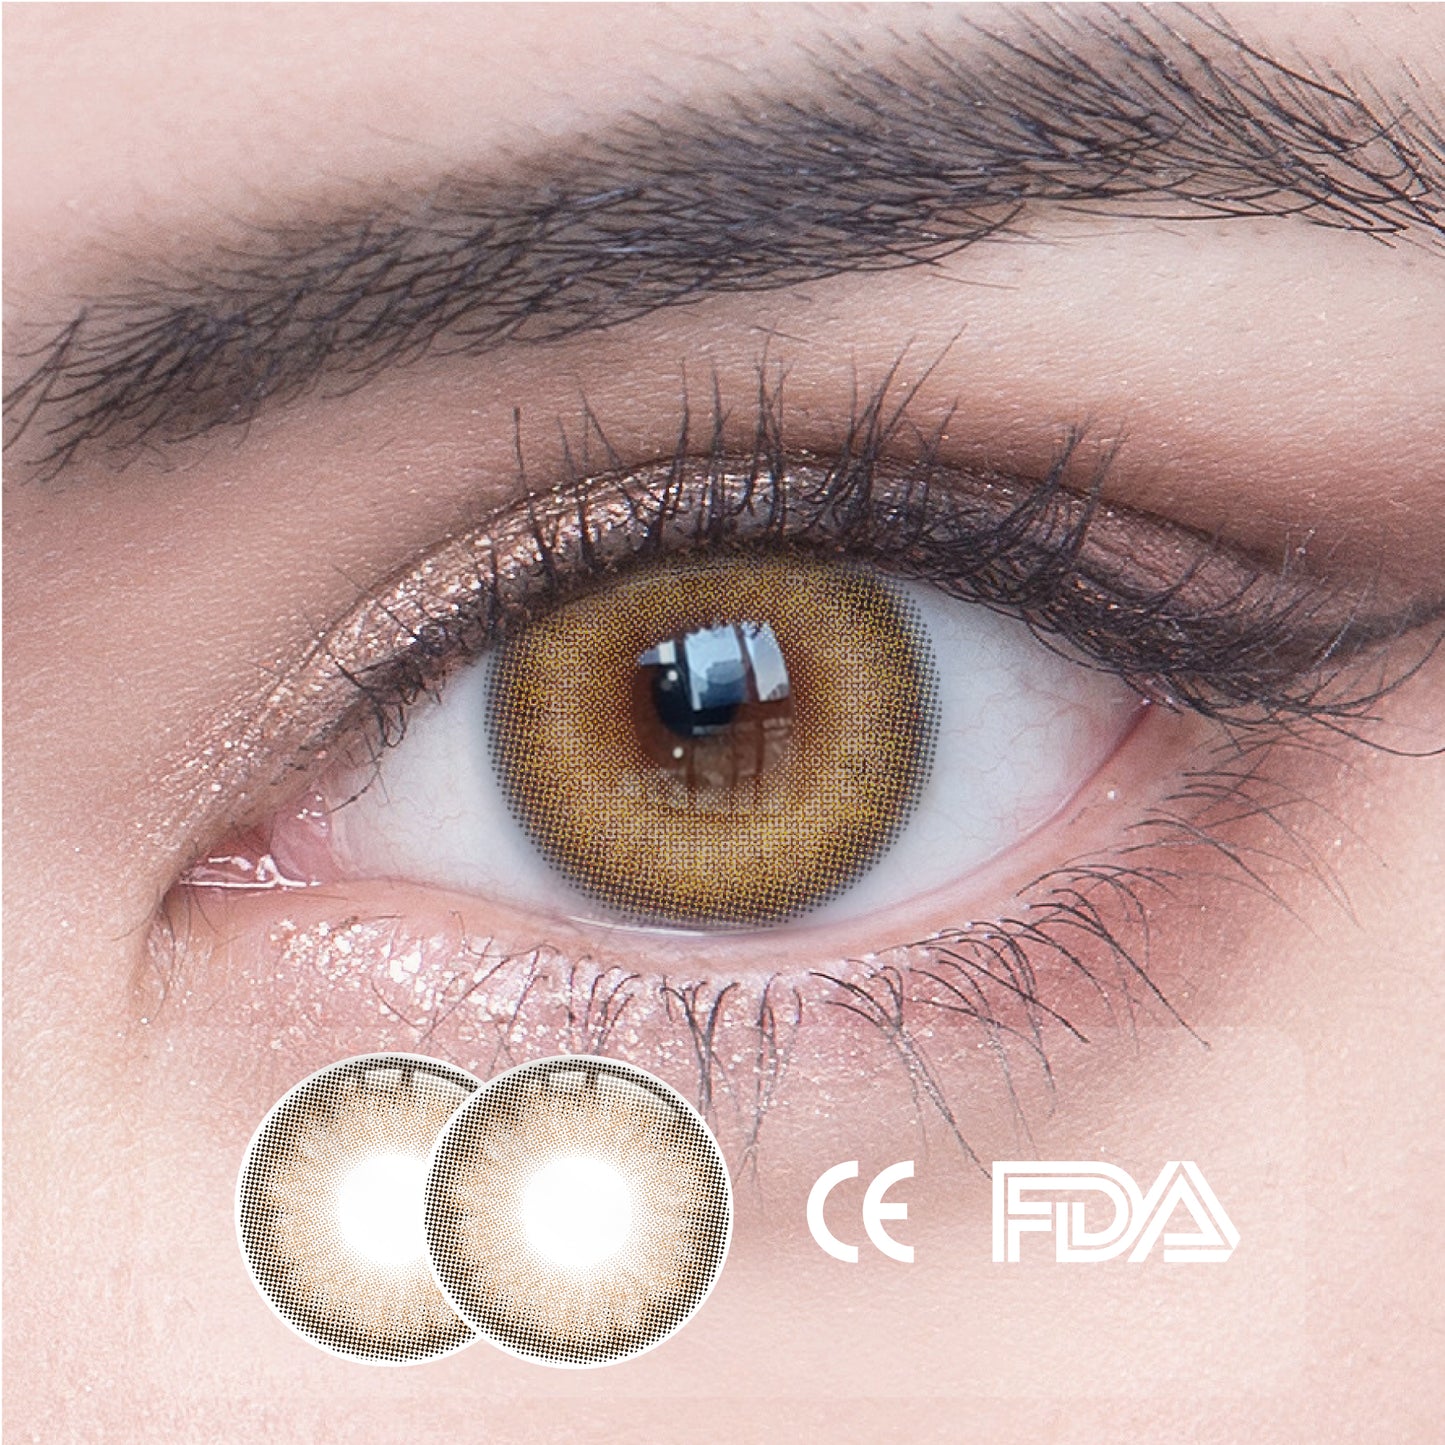 1pcs FDA Certificate Eyes Colorful Contact Lenses - Fascinated Brown